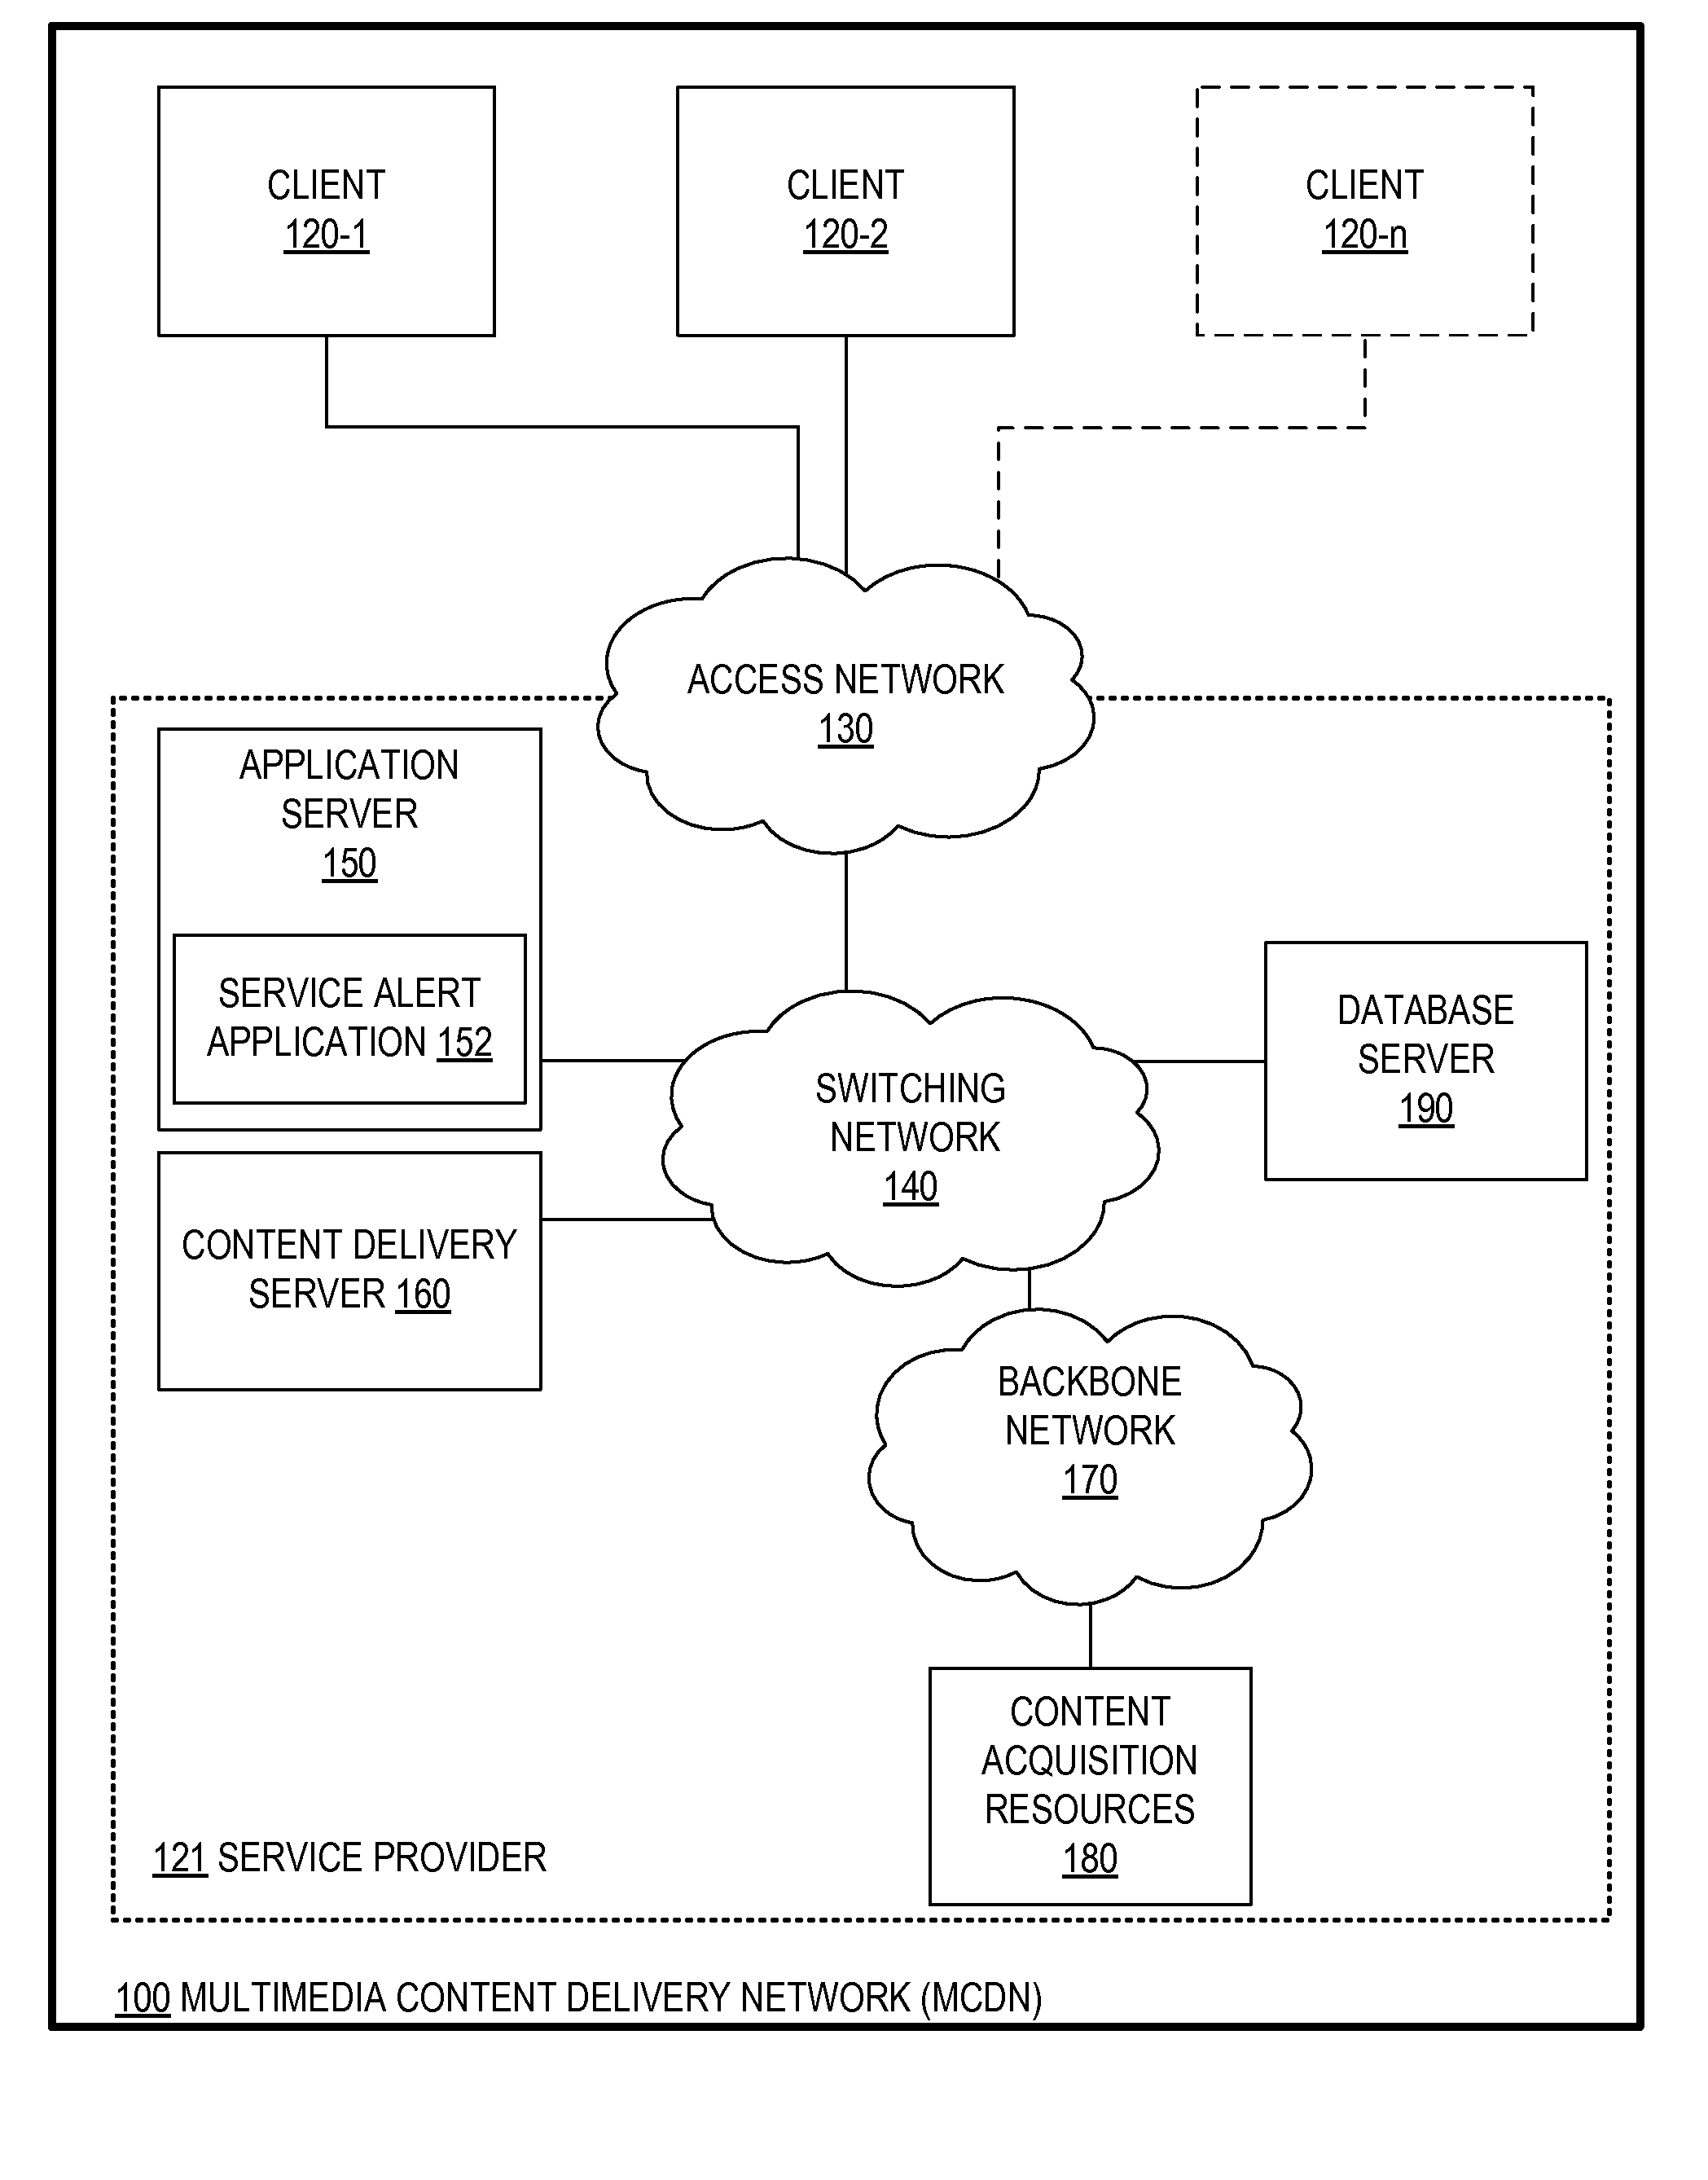 Incident reporting in a multimedia content distribution network